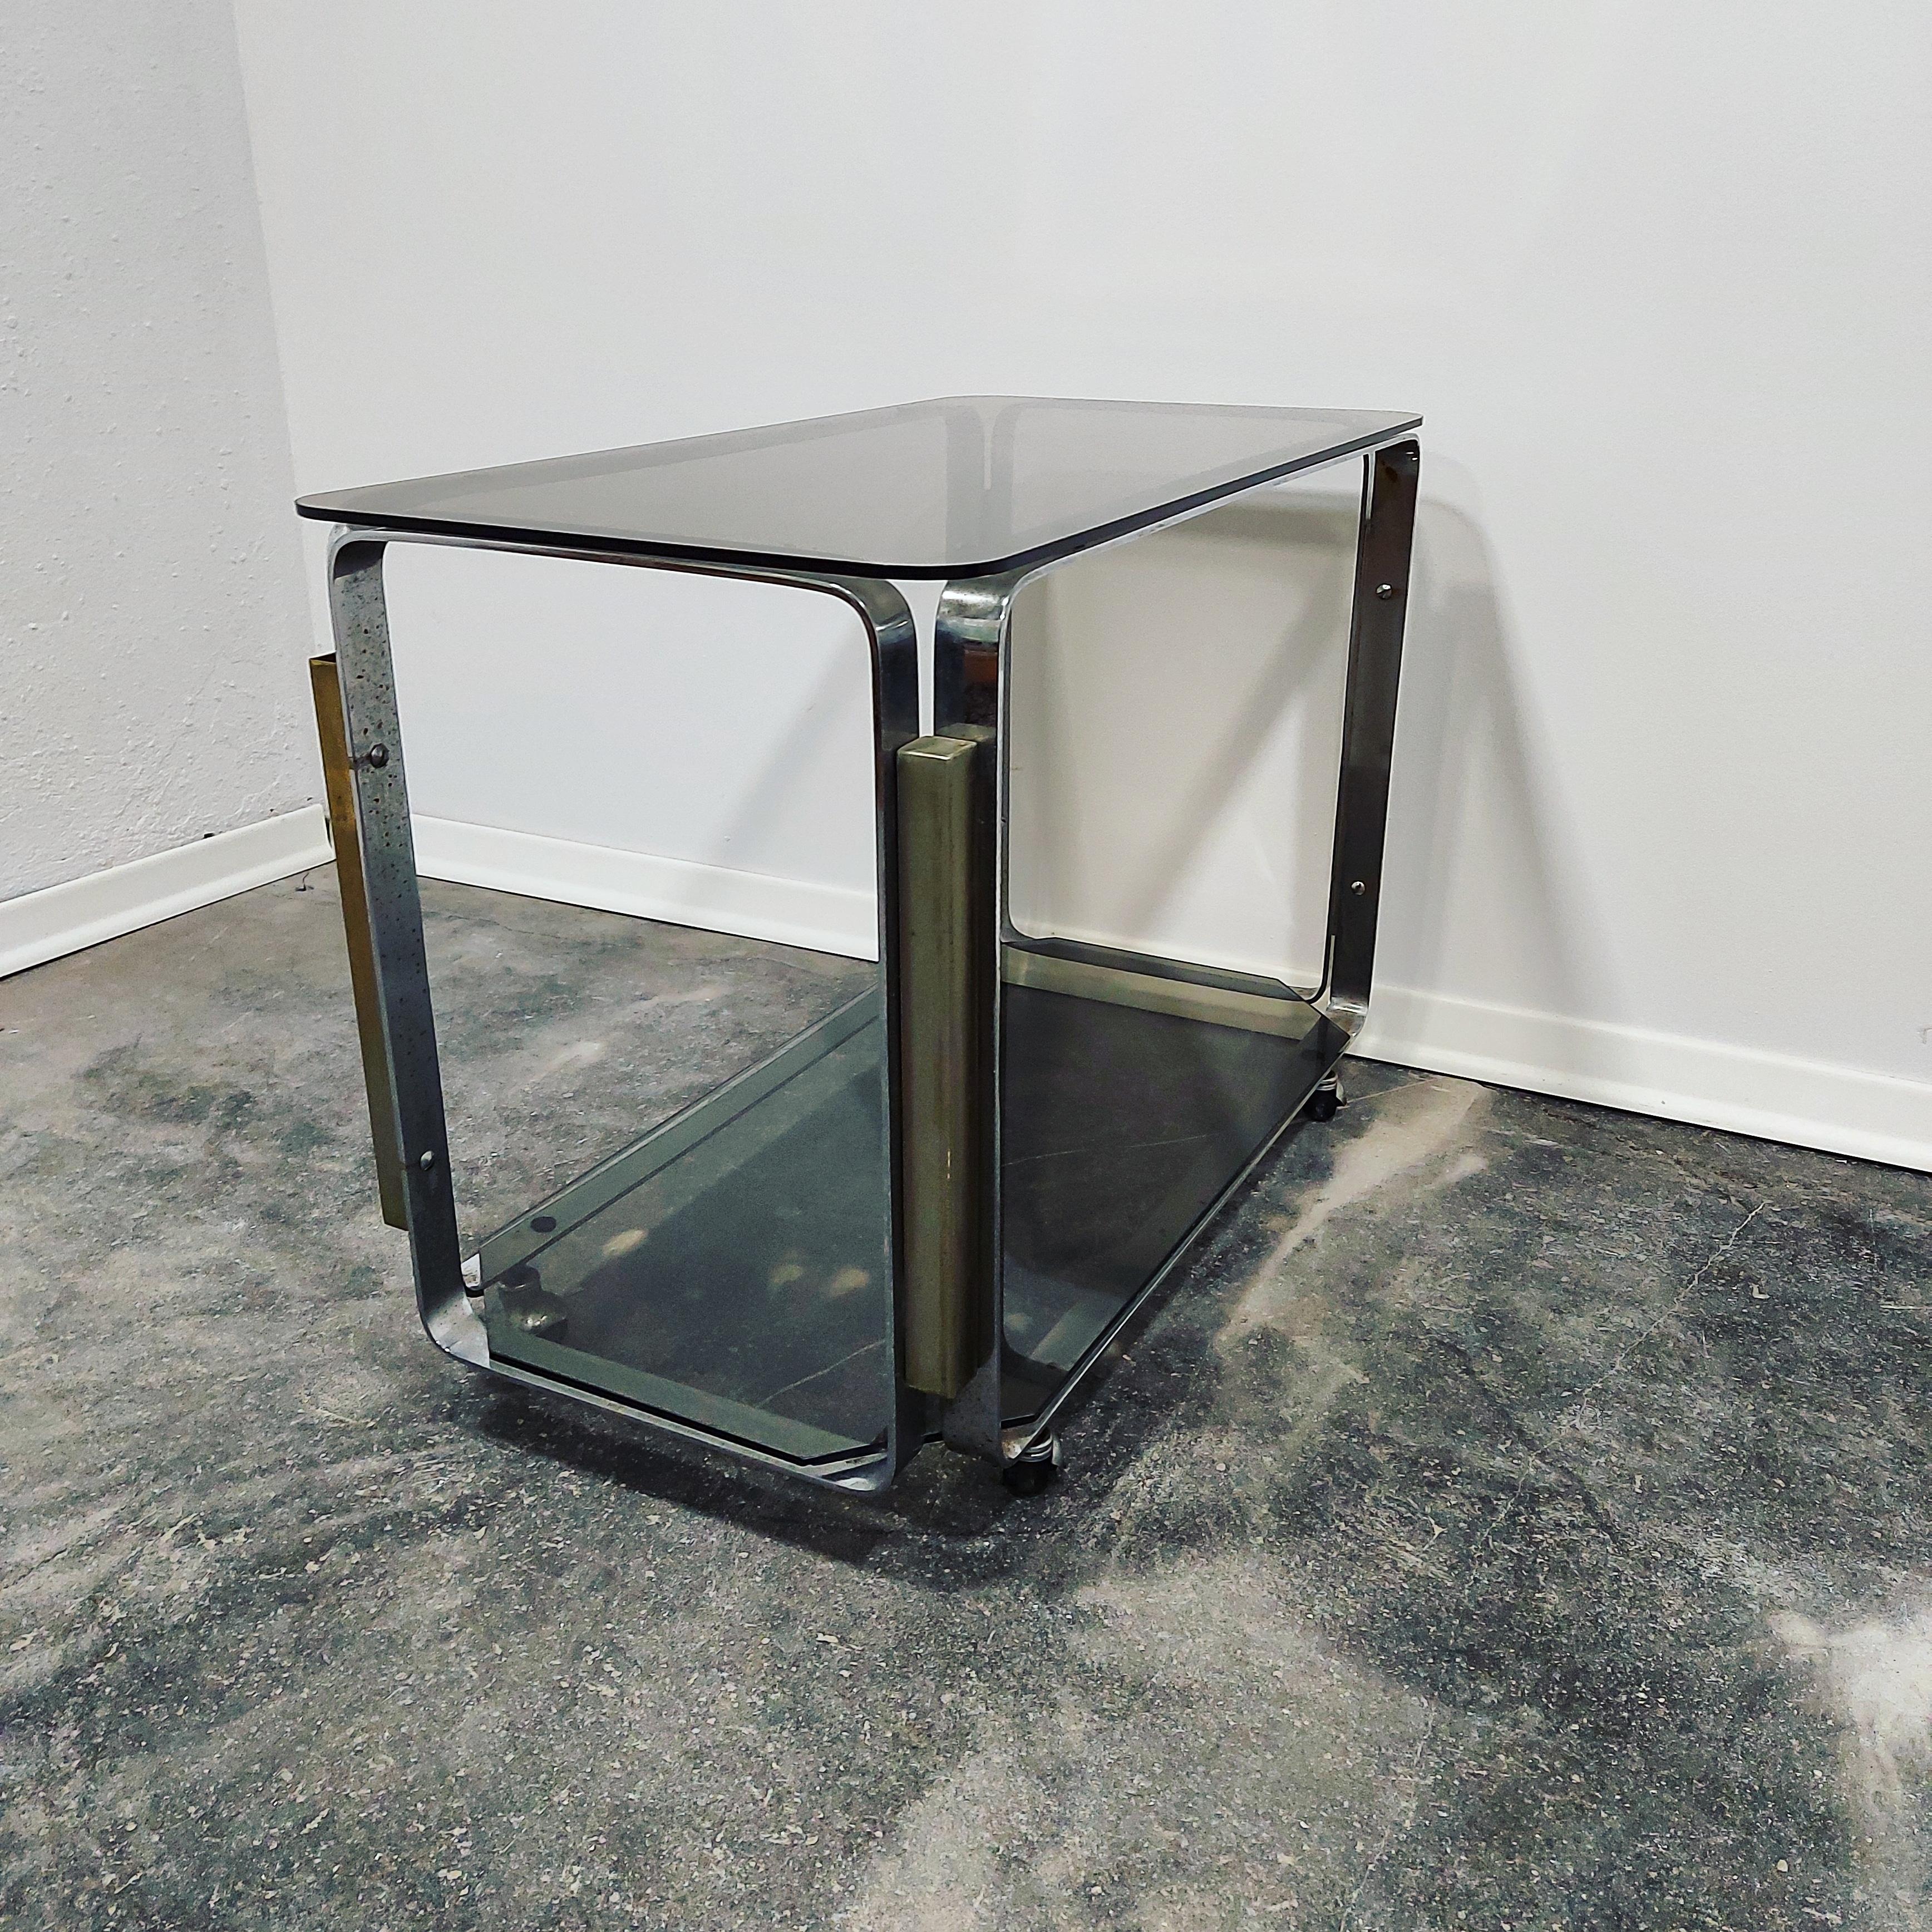 Unique Barcart from 1970s with wheels

Material: Stainless steel, Smoked glass
